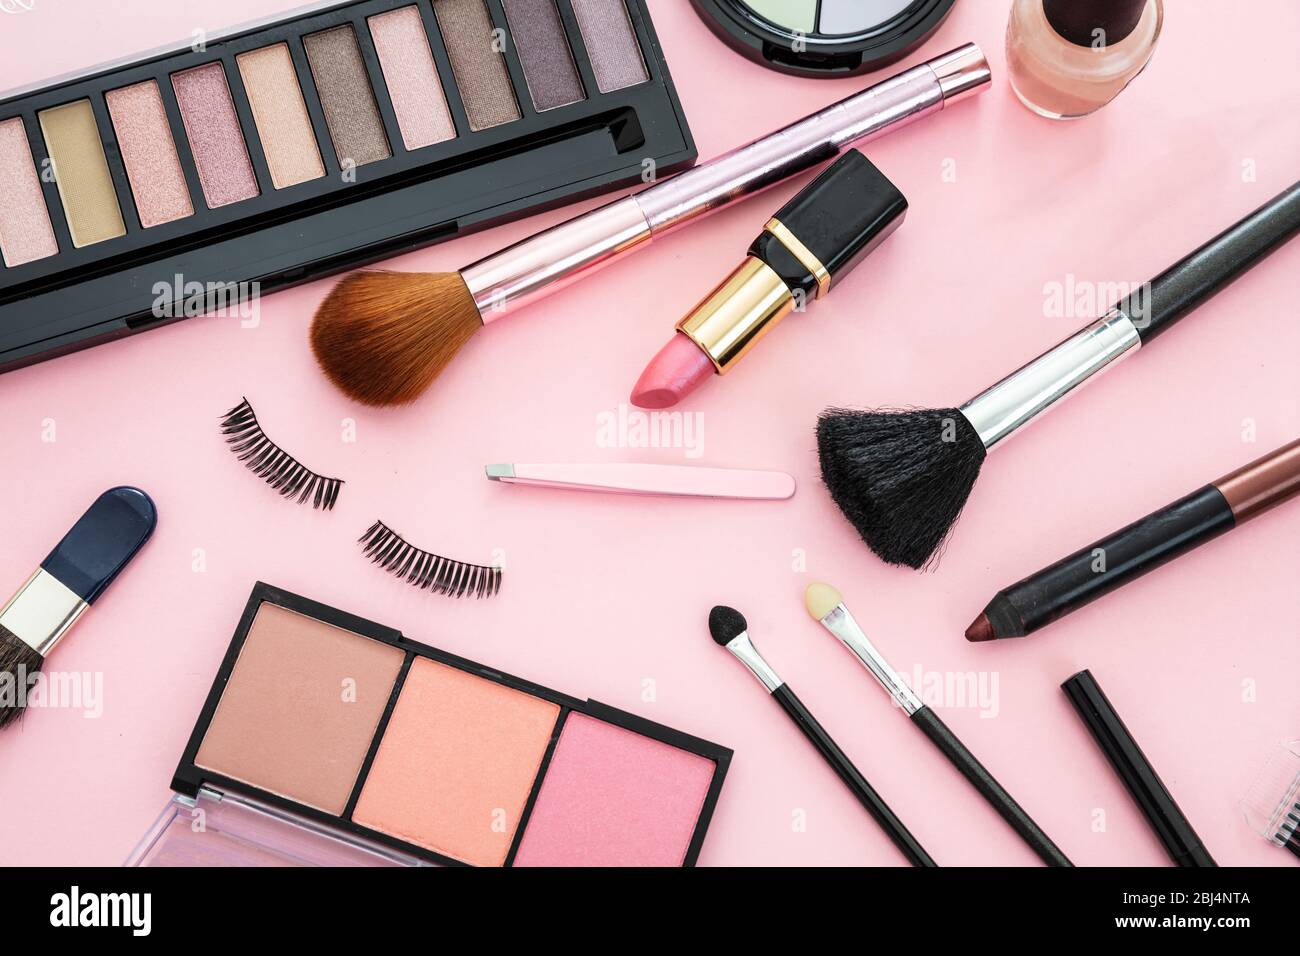 Make up cosmetics flat lay. Lipstick and nail polish, eye shadows and blush, brushes and pencils against pink color background Stock Photo